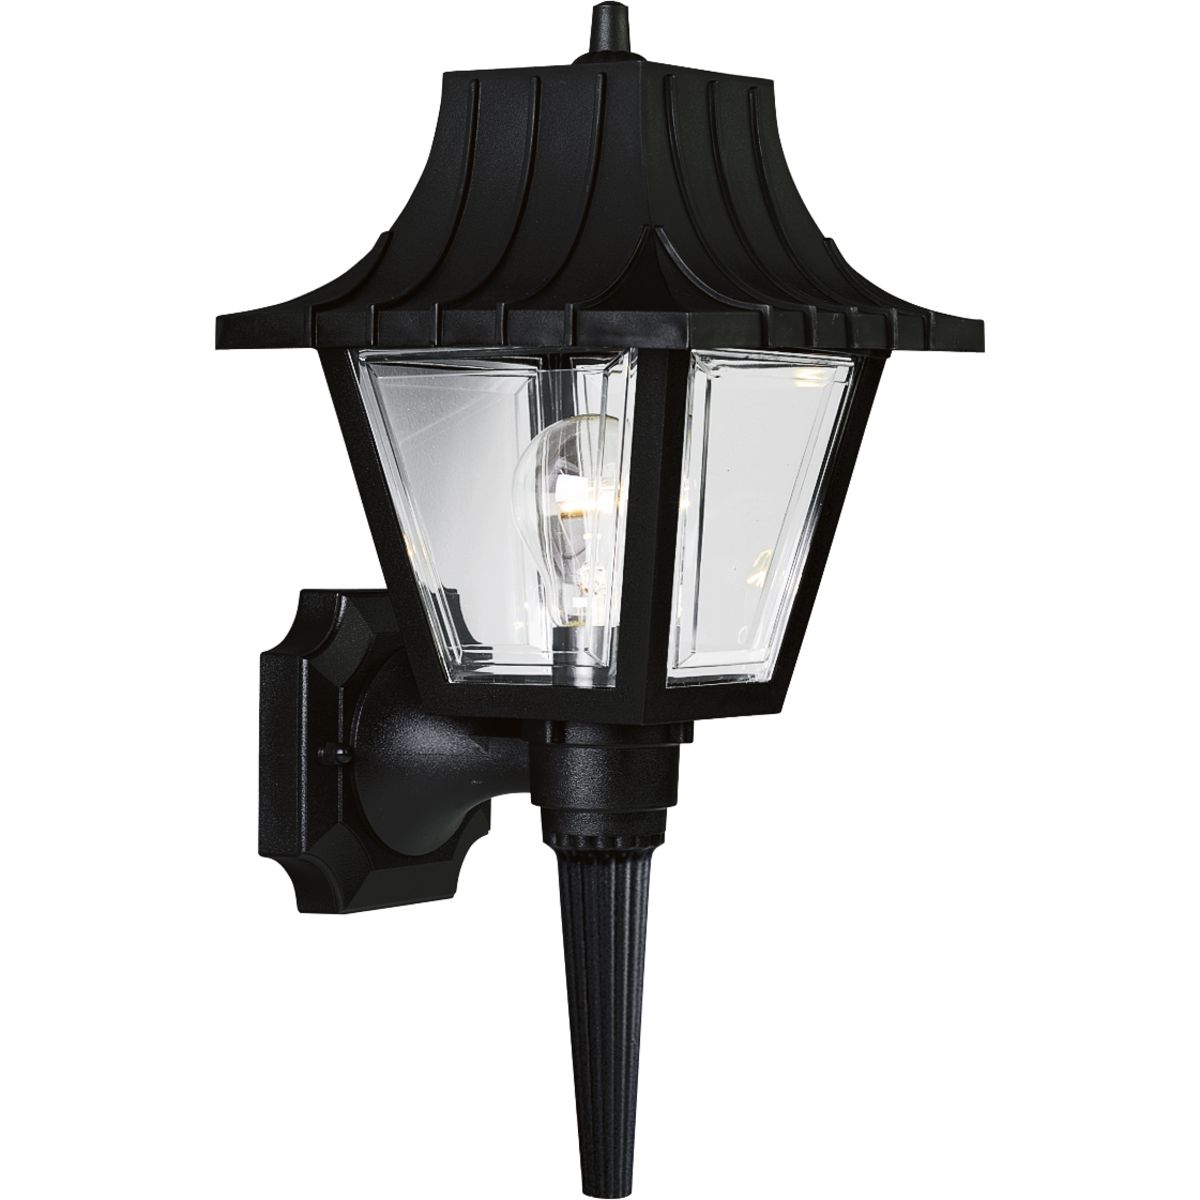 Classic style wall lantern with ribbed mansard roof and tail. Beveled clear acrylic panels. Polypropylene construction. Black finish.